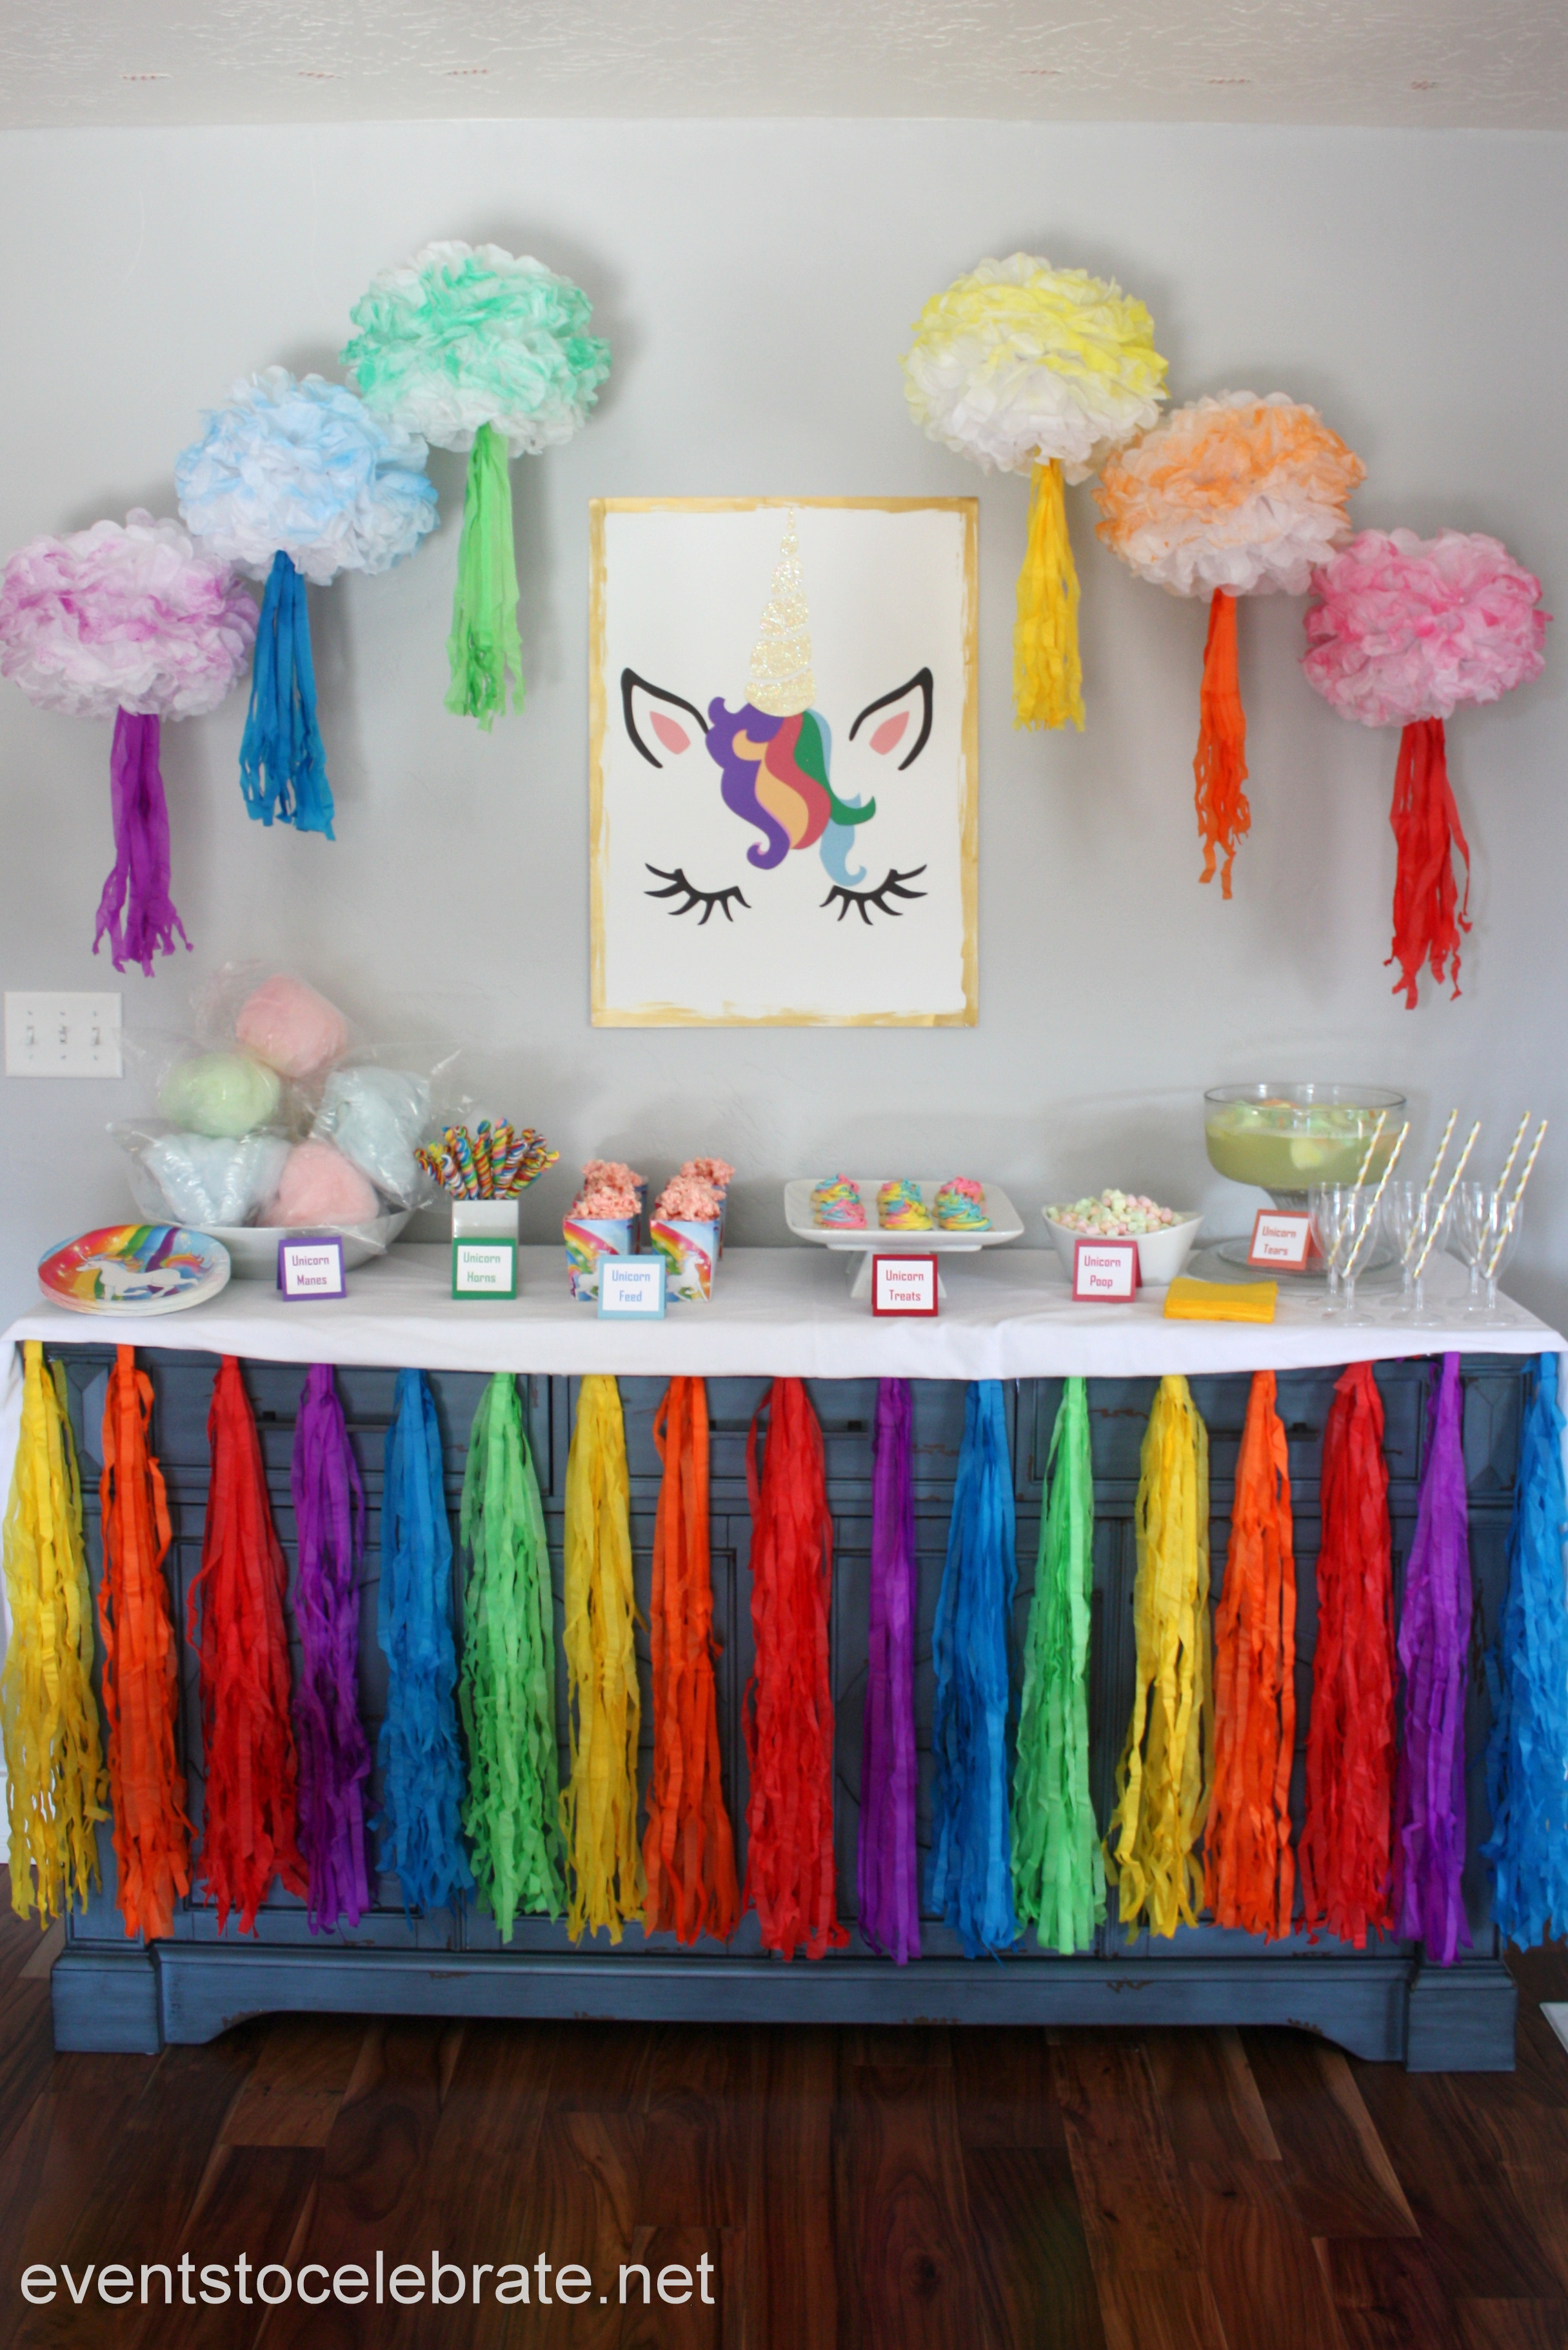 Unicorn Party Centerpiece Ideas
 Unicorn Party Decorations and Food events to CELEBRATE